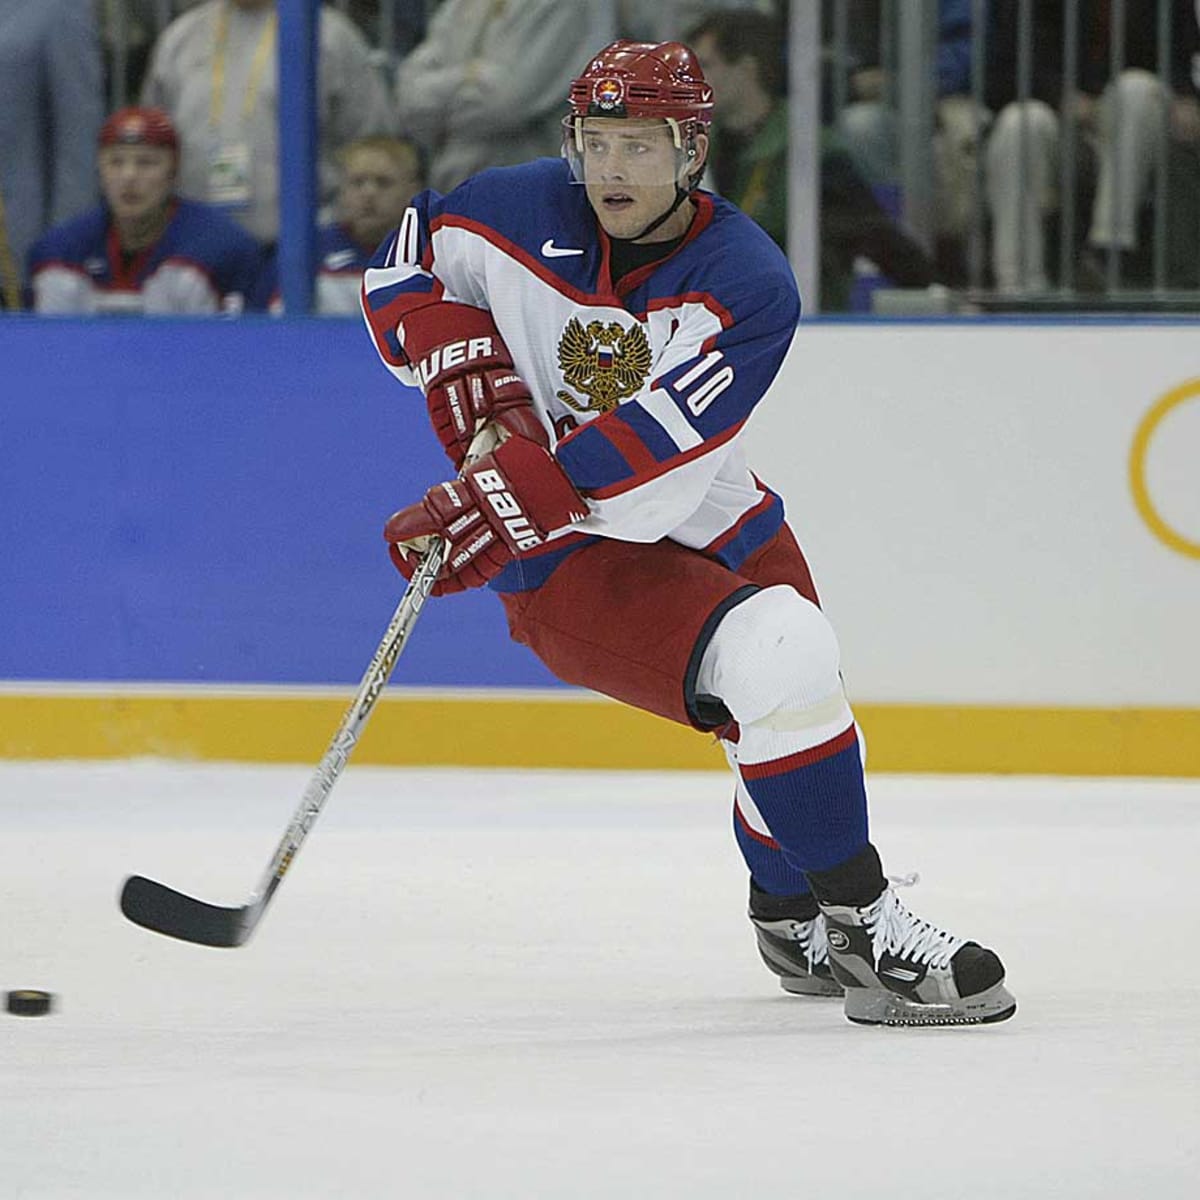 Hall of Famer and Olympic medallist Fedorov appointed CSKA Moscow head coach